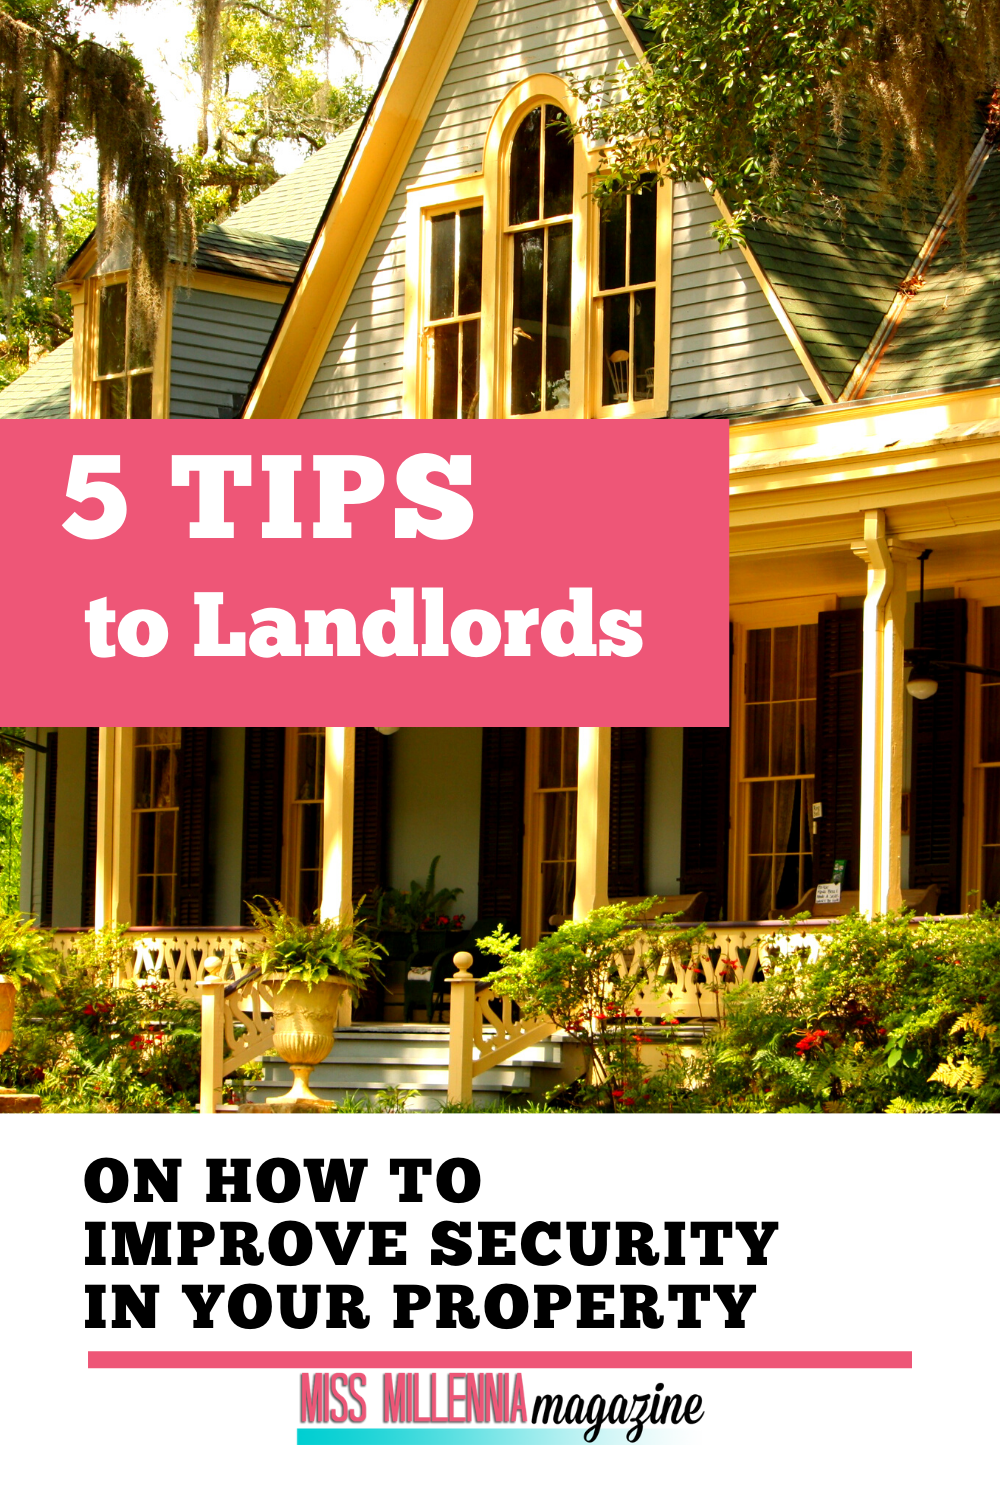 5 Tips to Landlords on How to Improve Security in Your Property